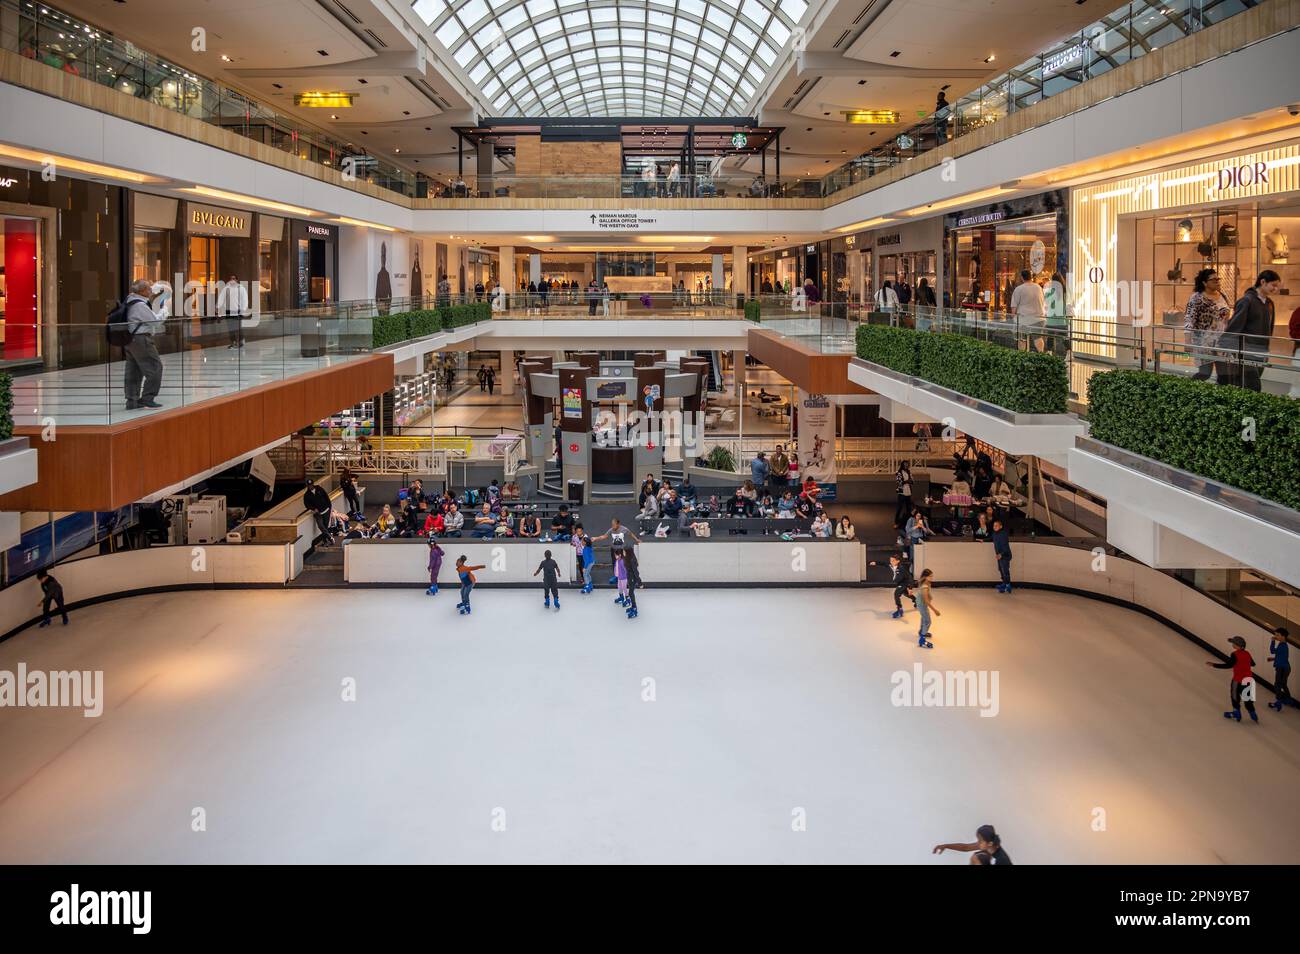 HOUSTON TX SKATING RINK IN THE GALLERIA SHOPPING MALL Stock Photo - Alamy